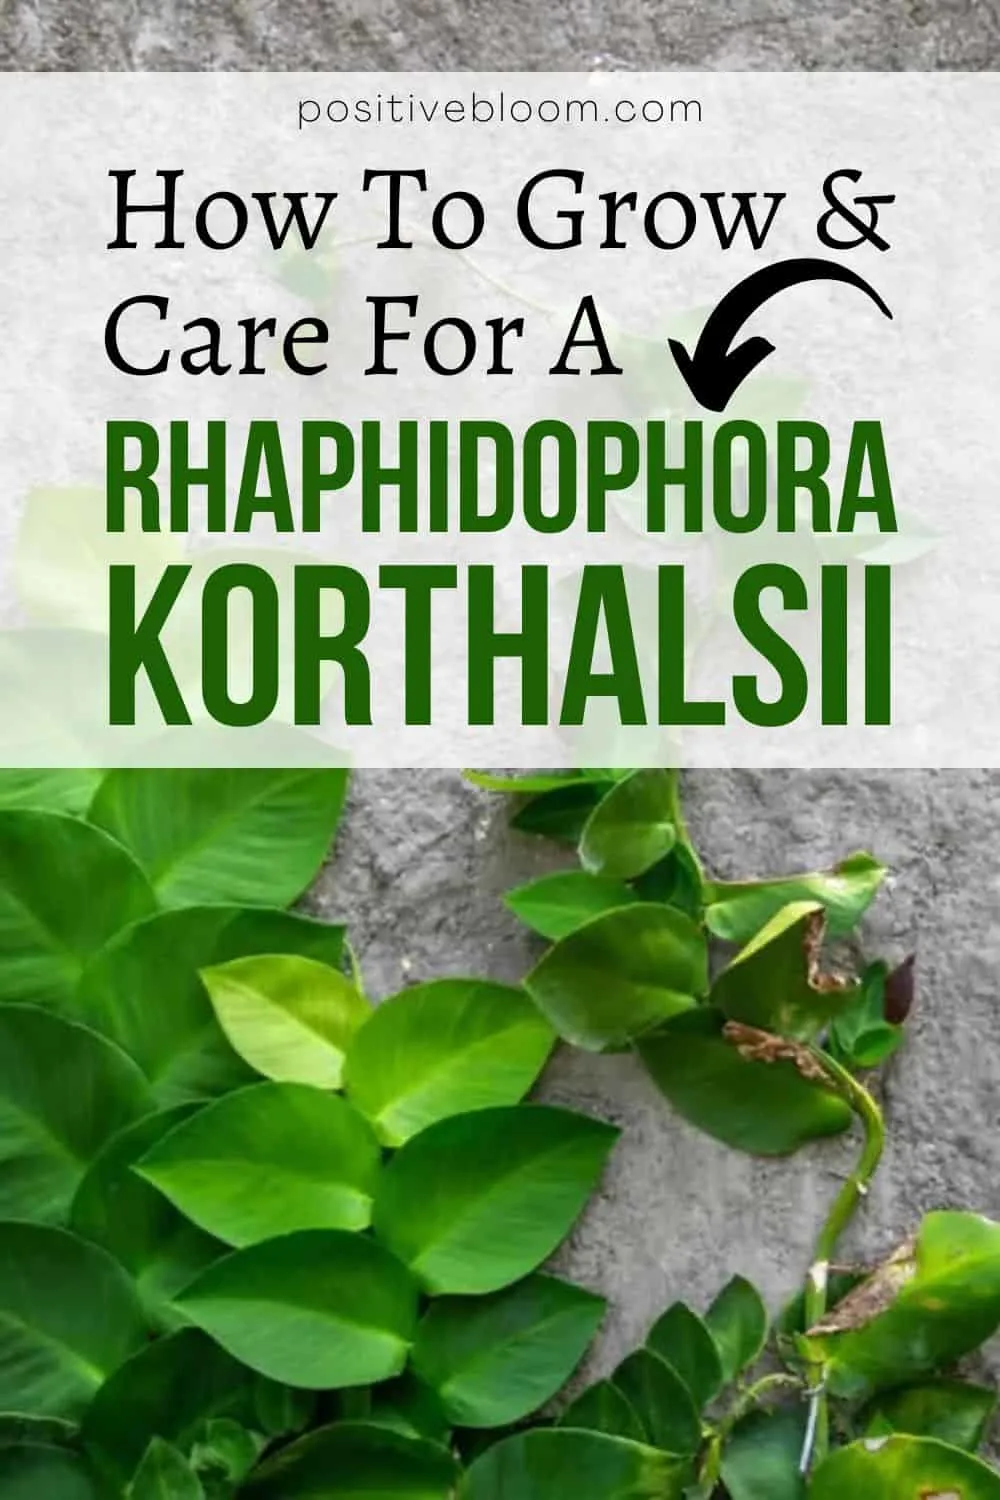 How To Grow And Care For A Rhaphidophora Korthalsii (Pro Tips) Pinterest